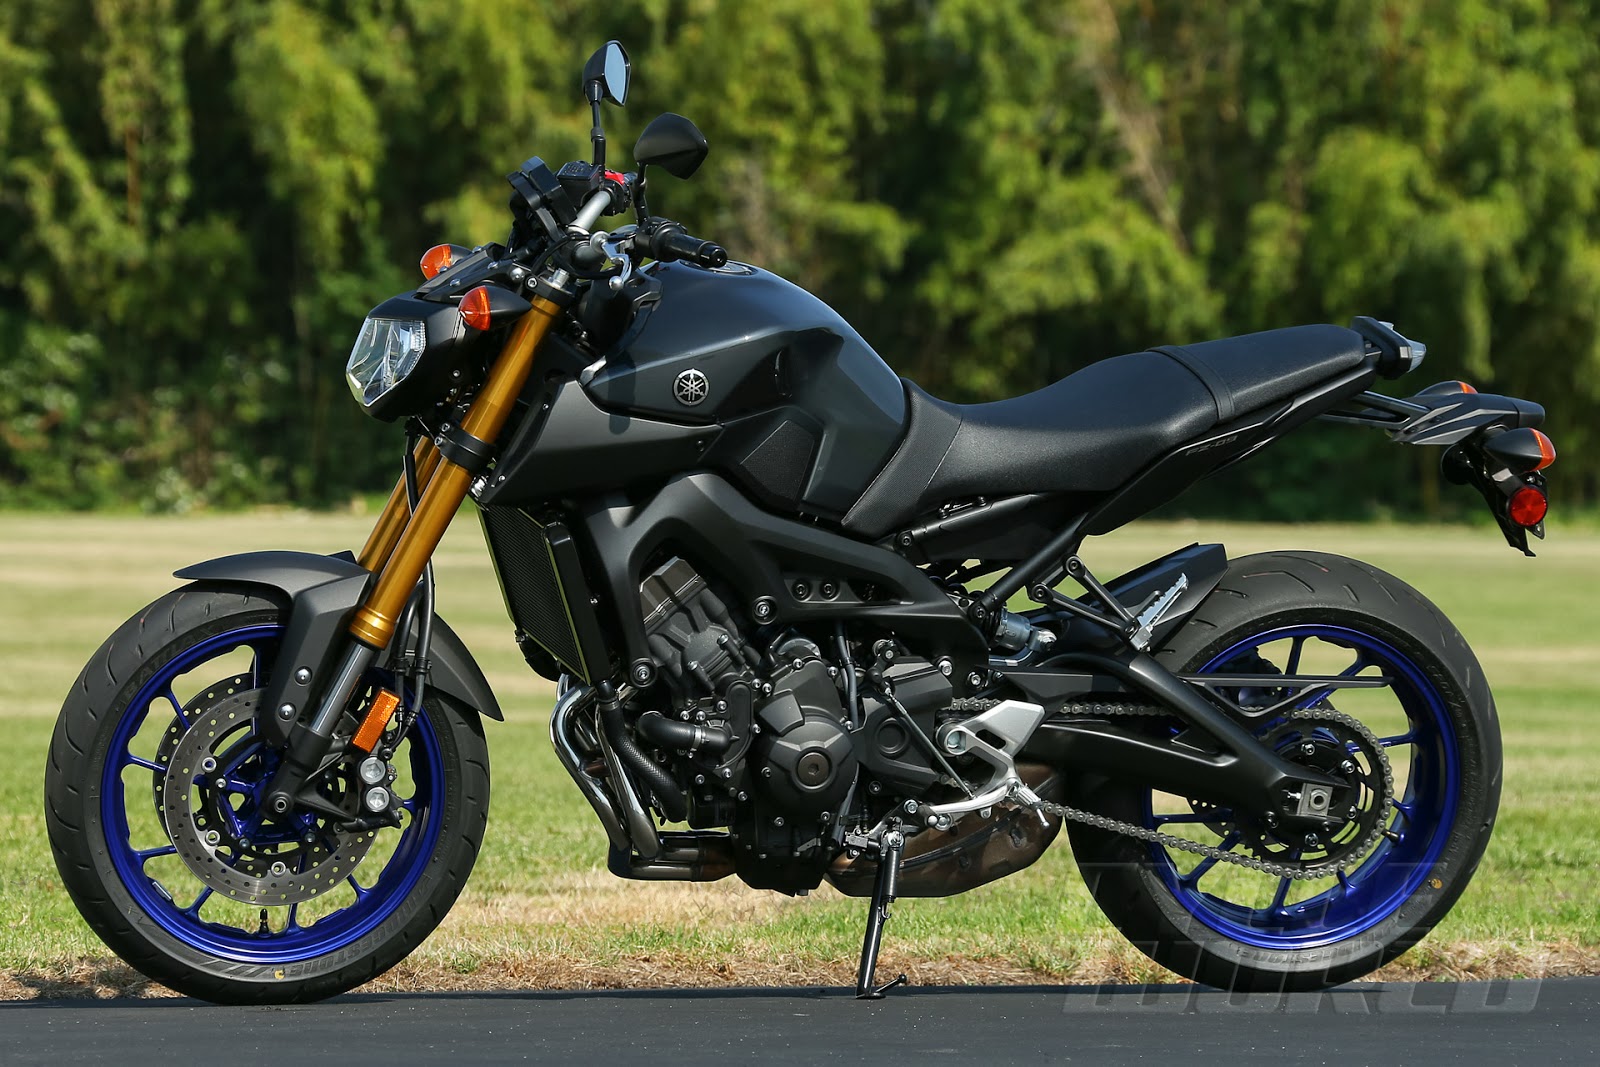 2014 Yamaha FZ-09 | First Ride Review and Images | Riders